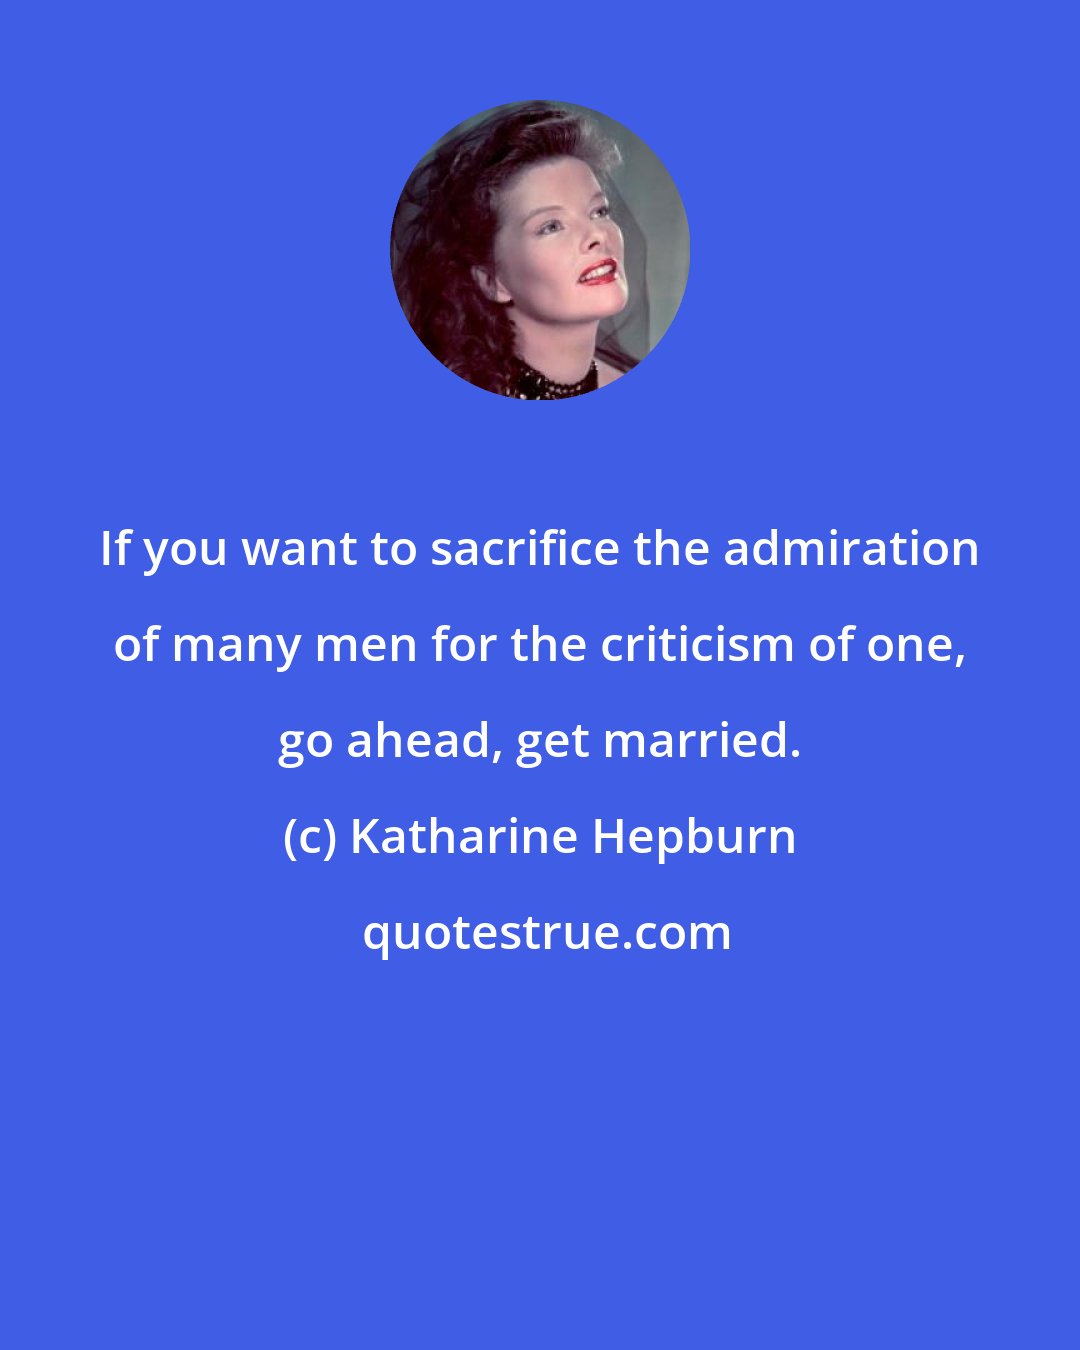 Katharine Hepburn: If you want to sacrifice the admiration of many men for the criticism of one, go ahead, get married.